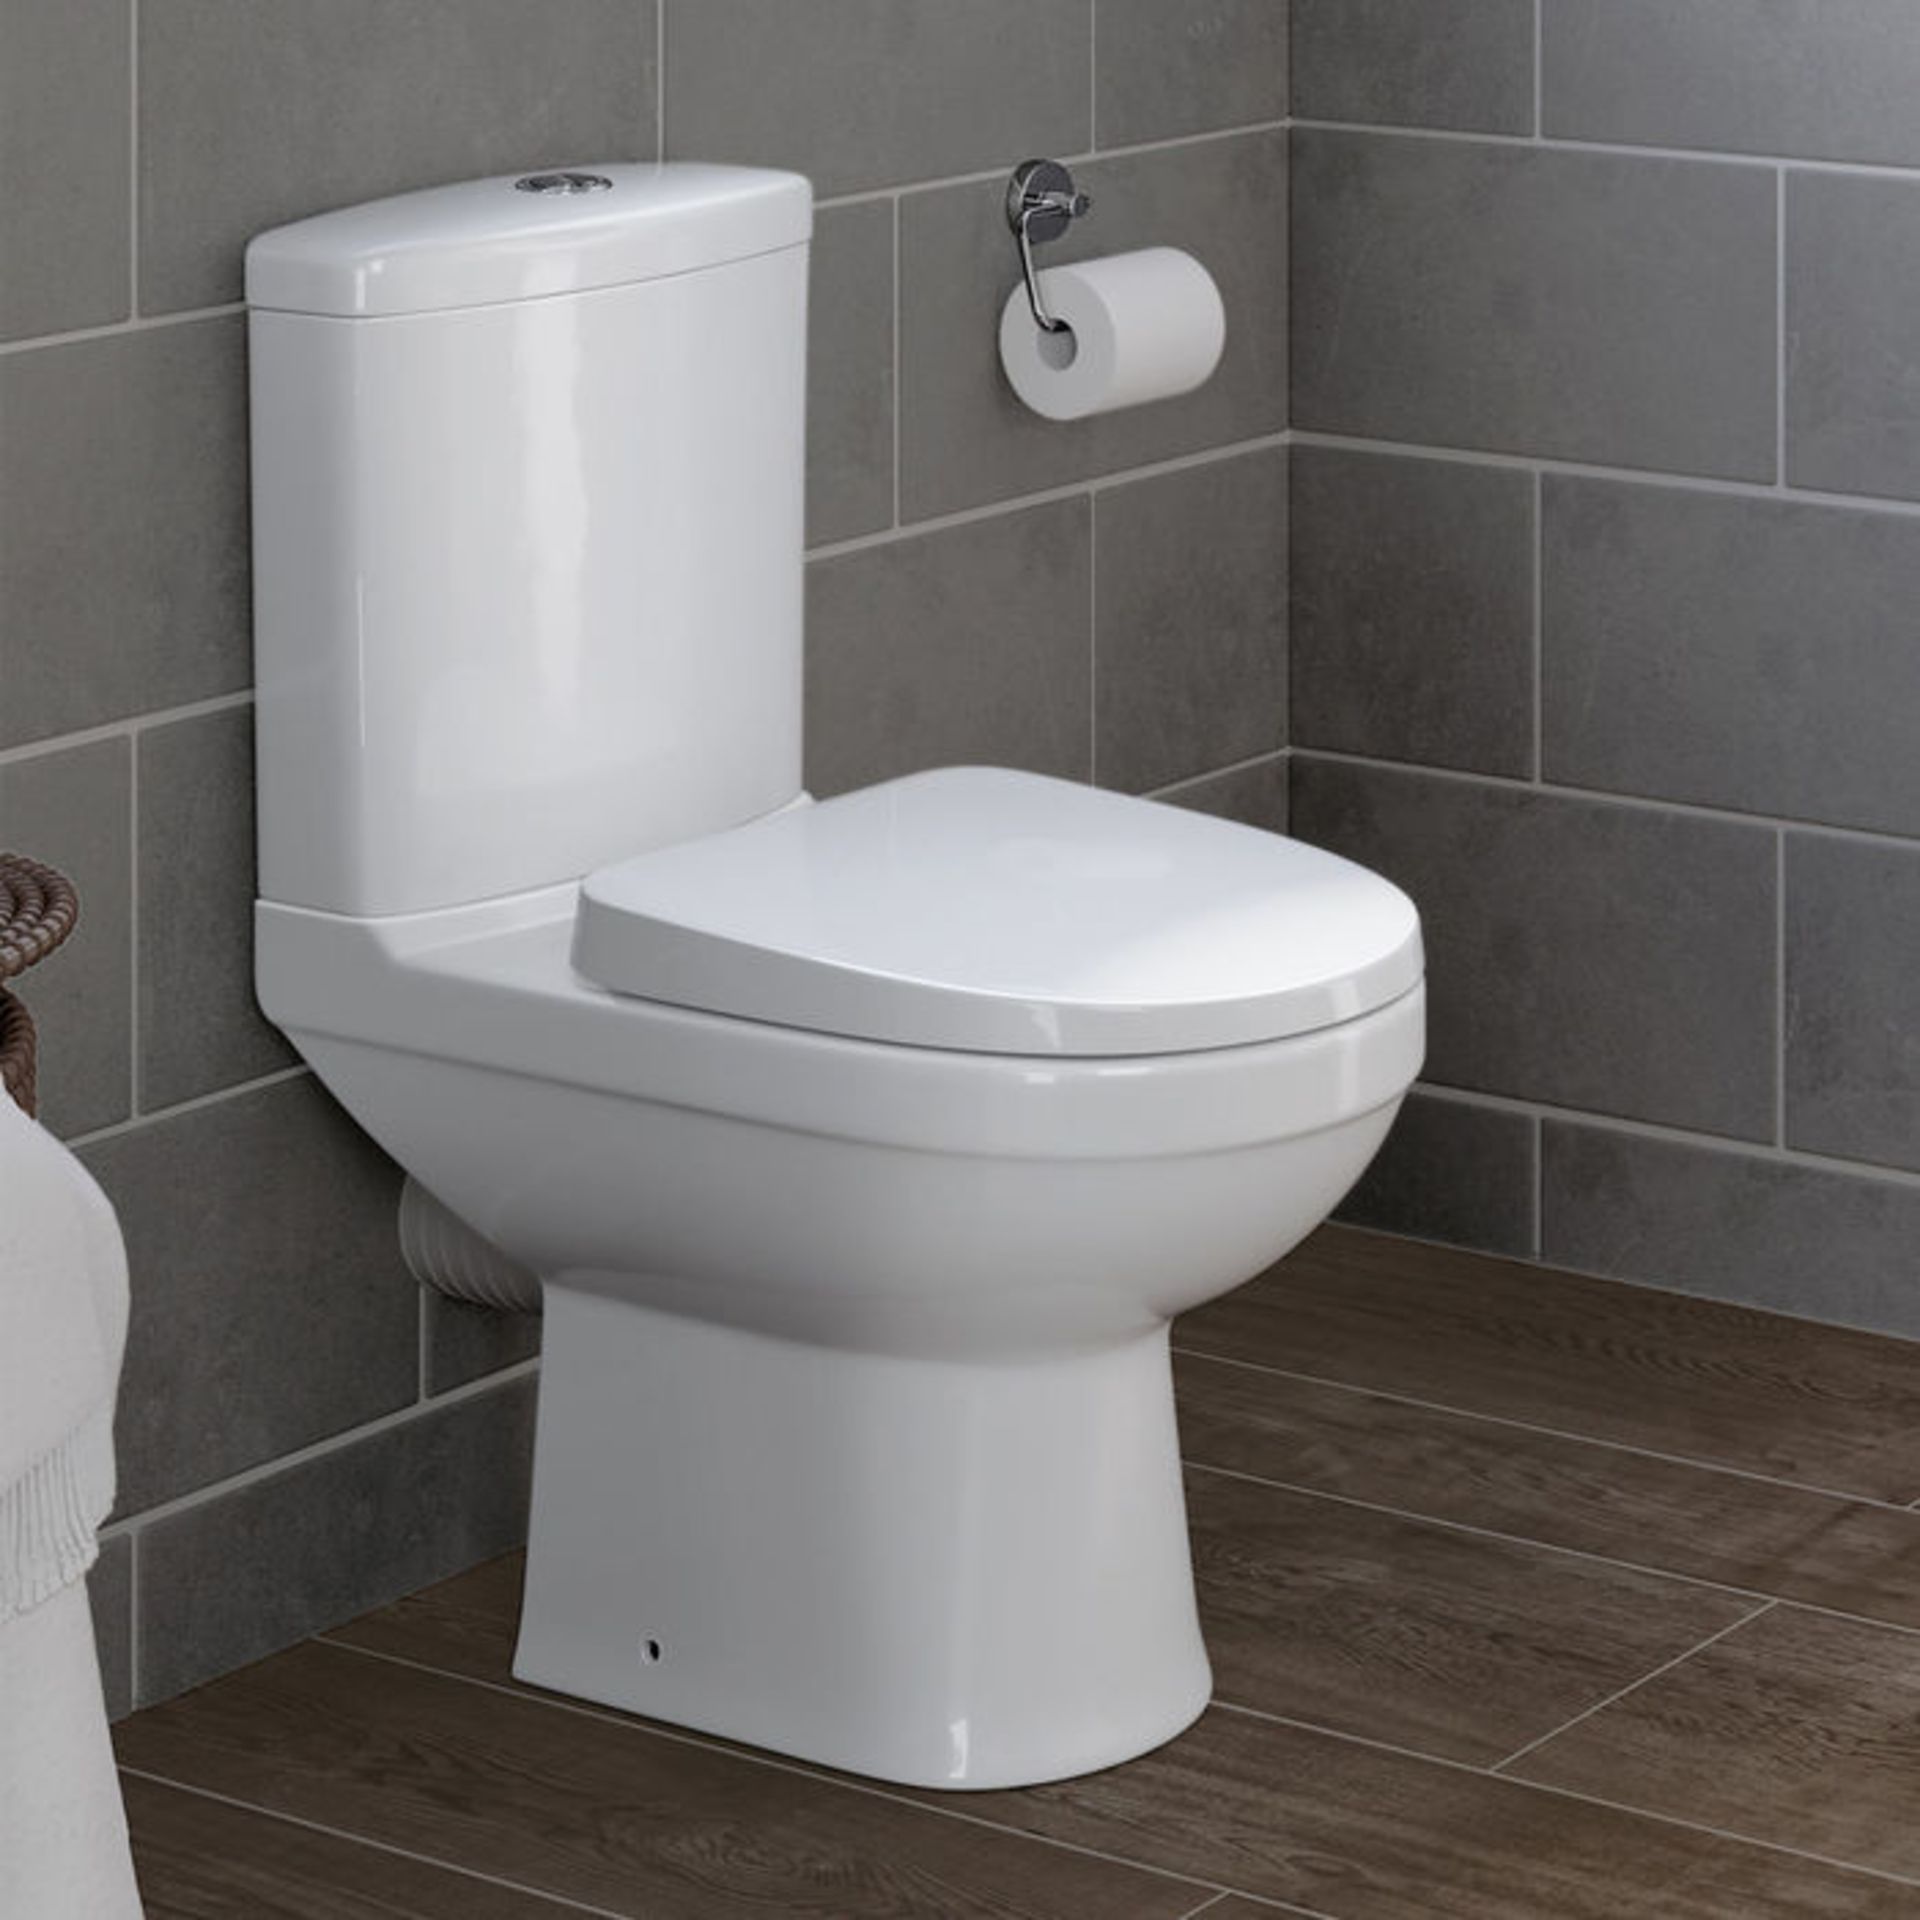 (PT33) Sabrosa II Close Coupled Toilet & Cistern inc Soft Close Seat Made from White Vitreous